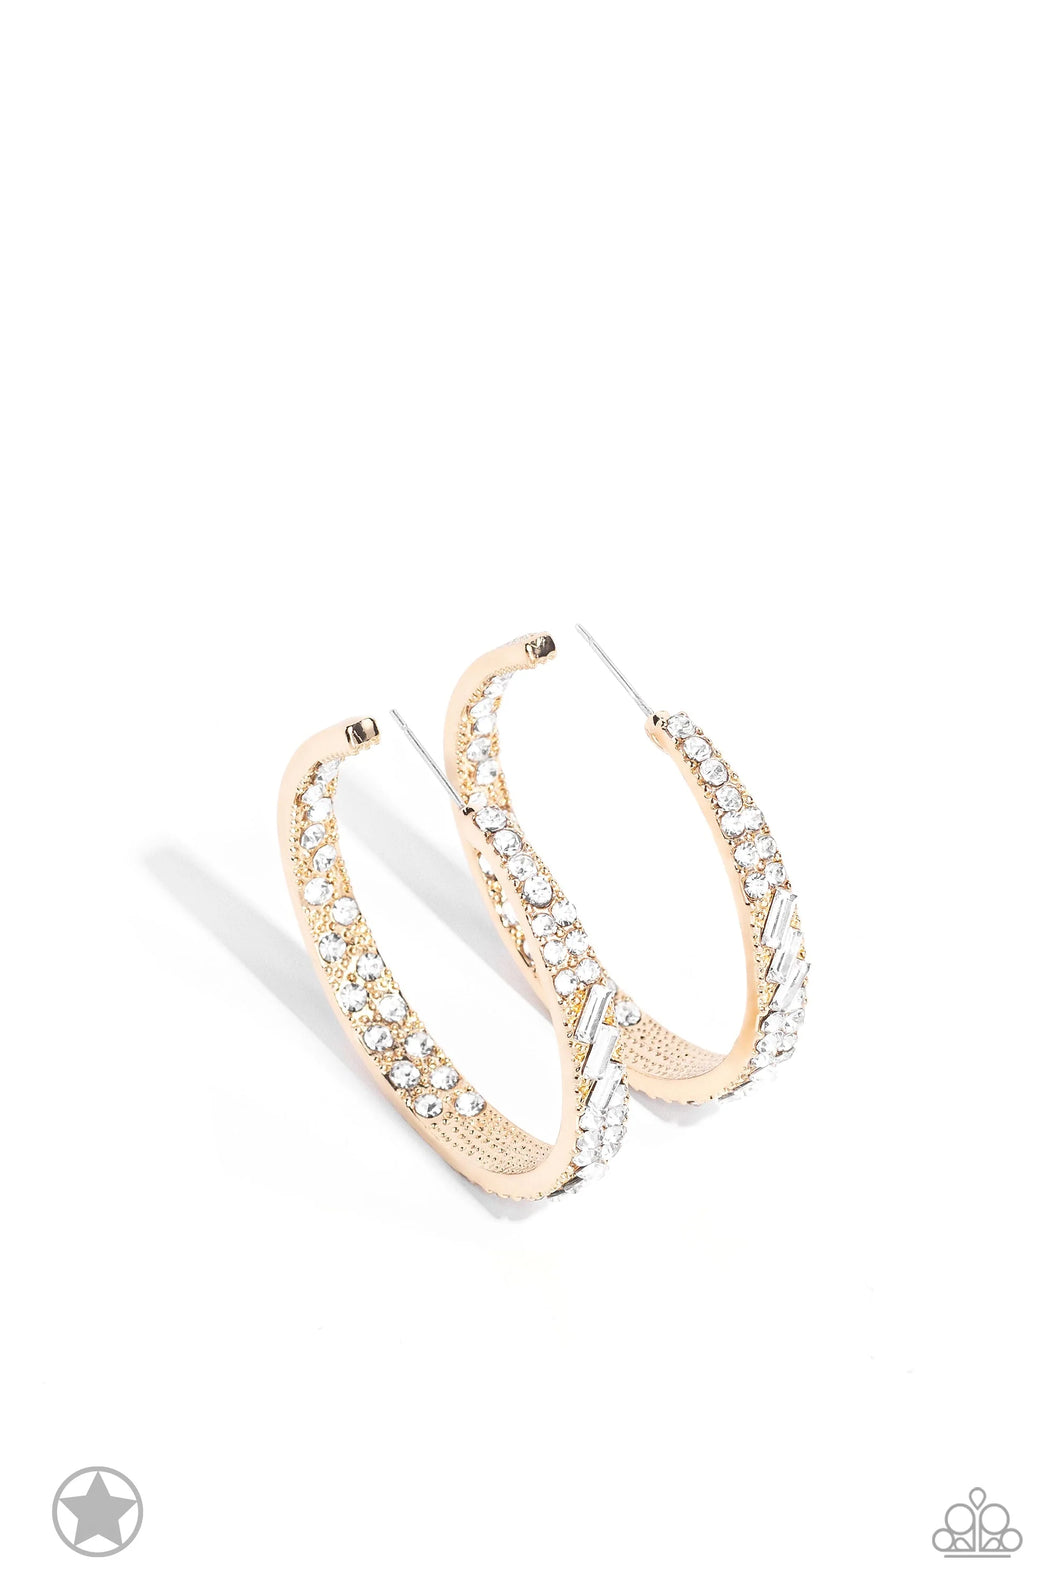 Glitzy By Association - Gold Hoop (Dipped in White Rhinestone) Earring